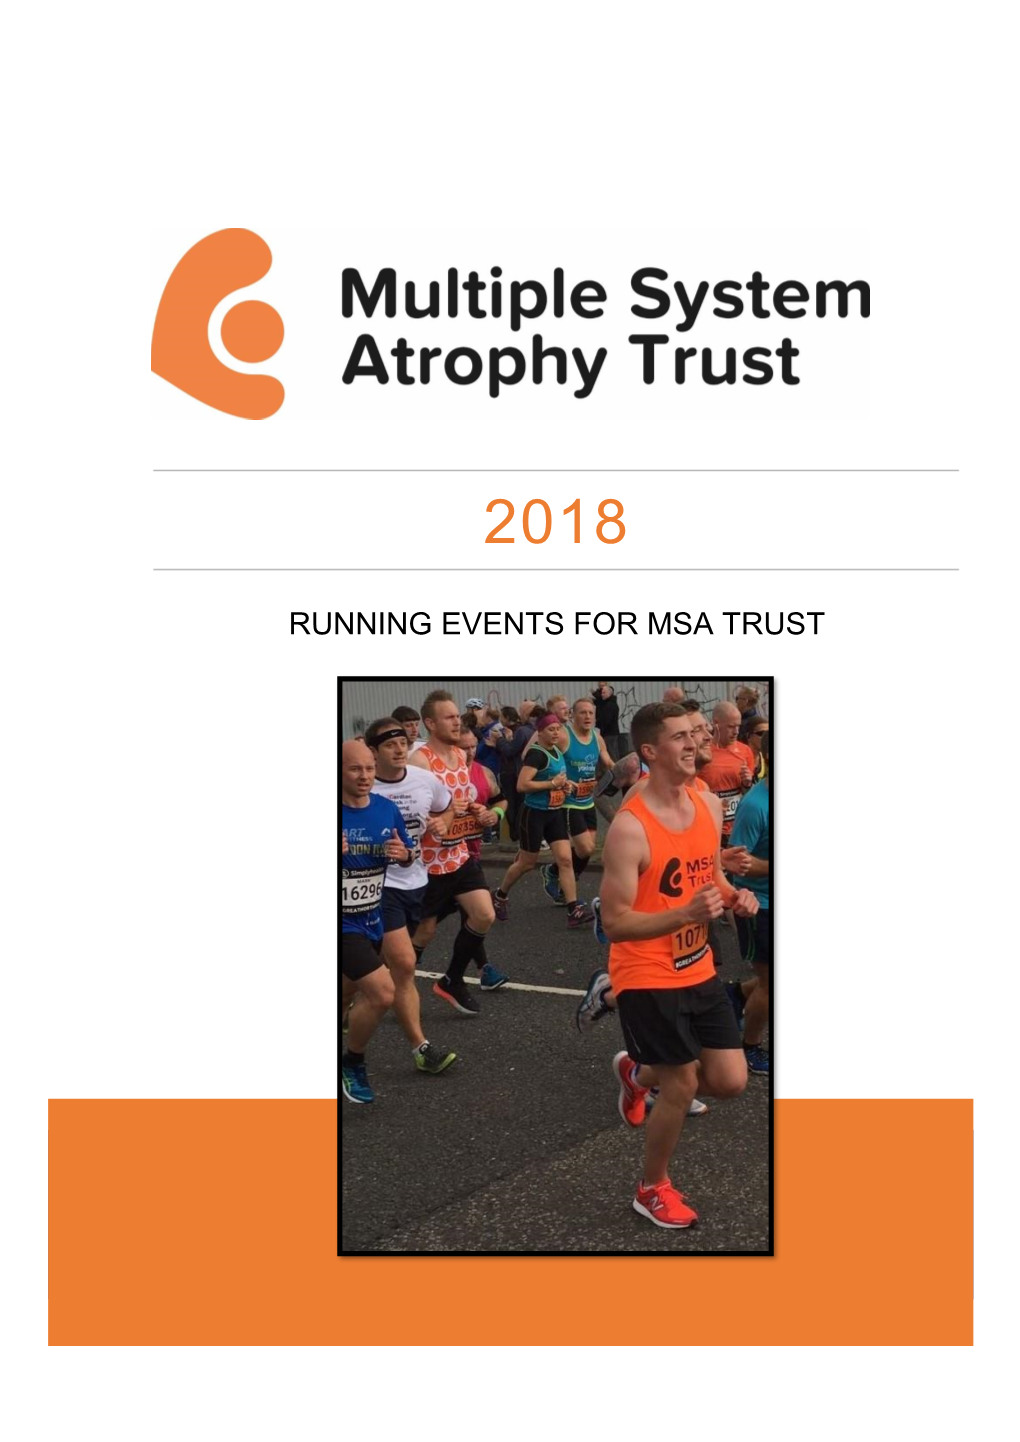 Running Events for Msa Trust